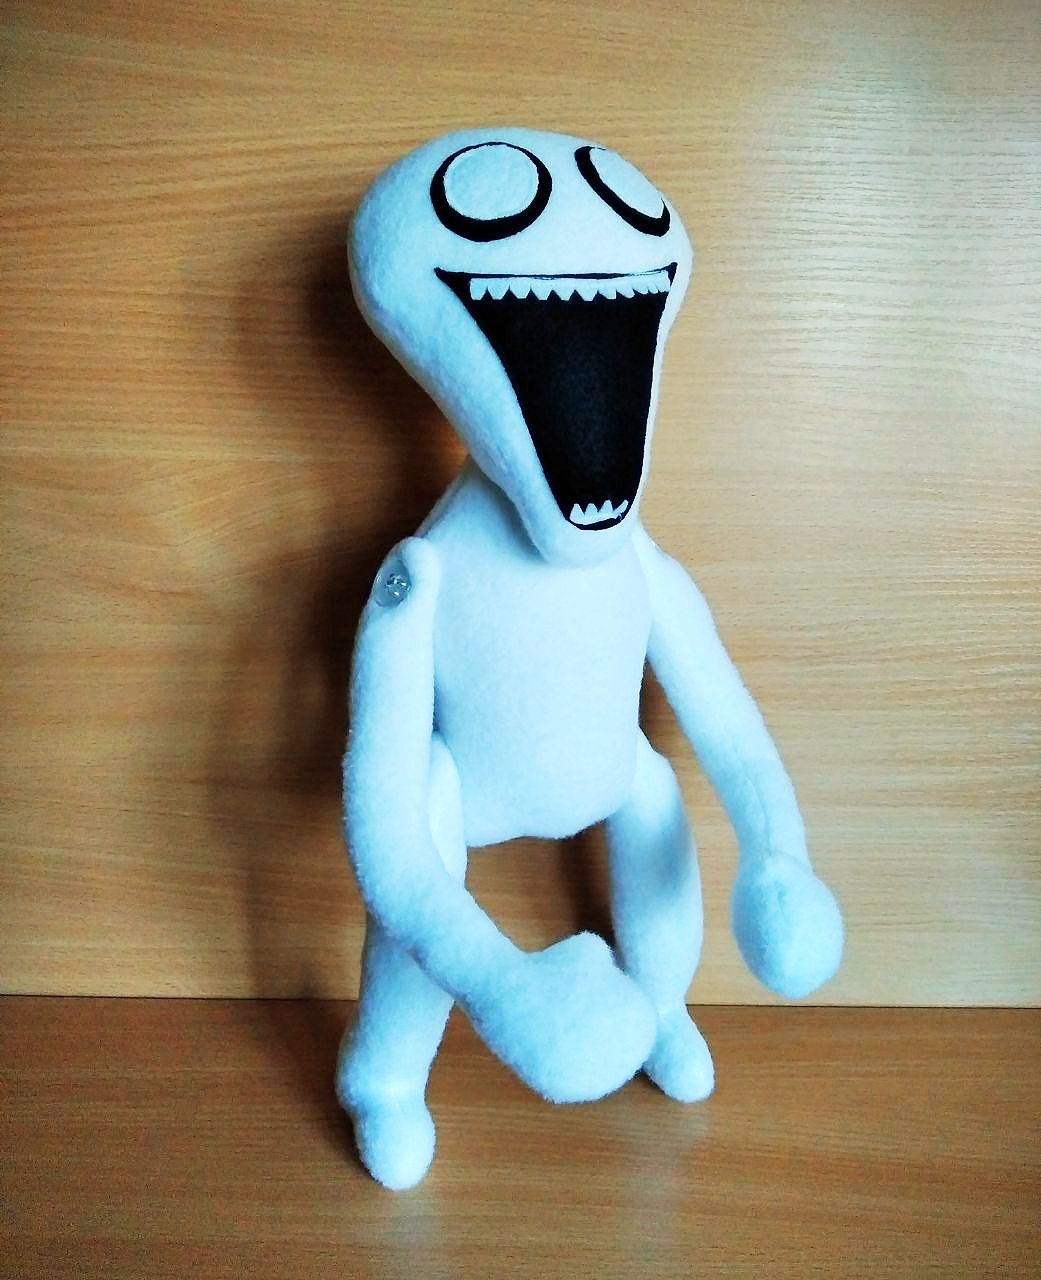 FIMIGID SCP Plush Toy, SCP 096 Monster Horror Stuffed Toy Doll for Kids